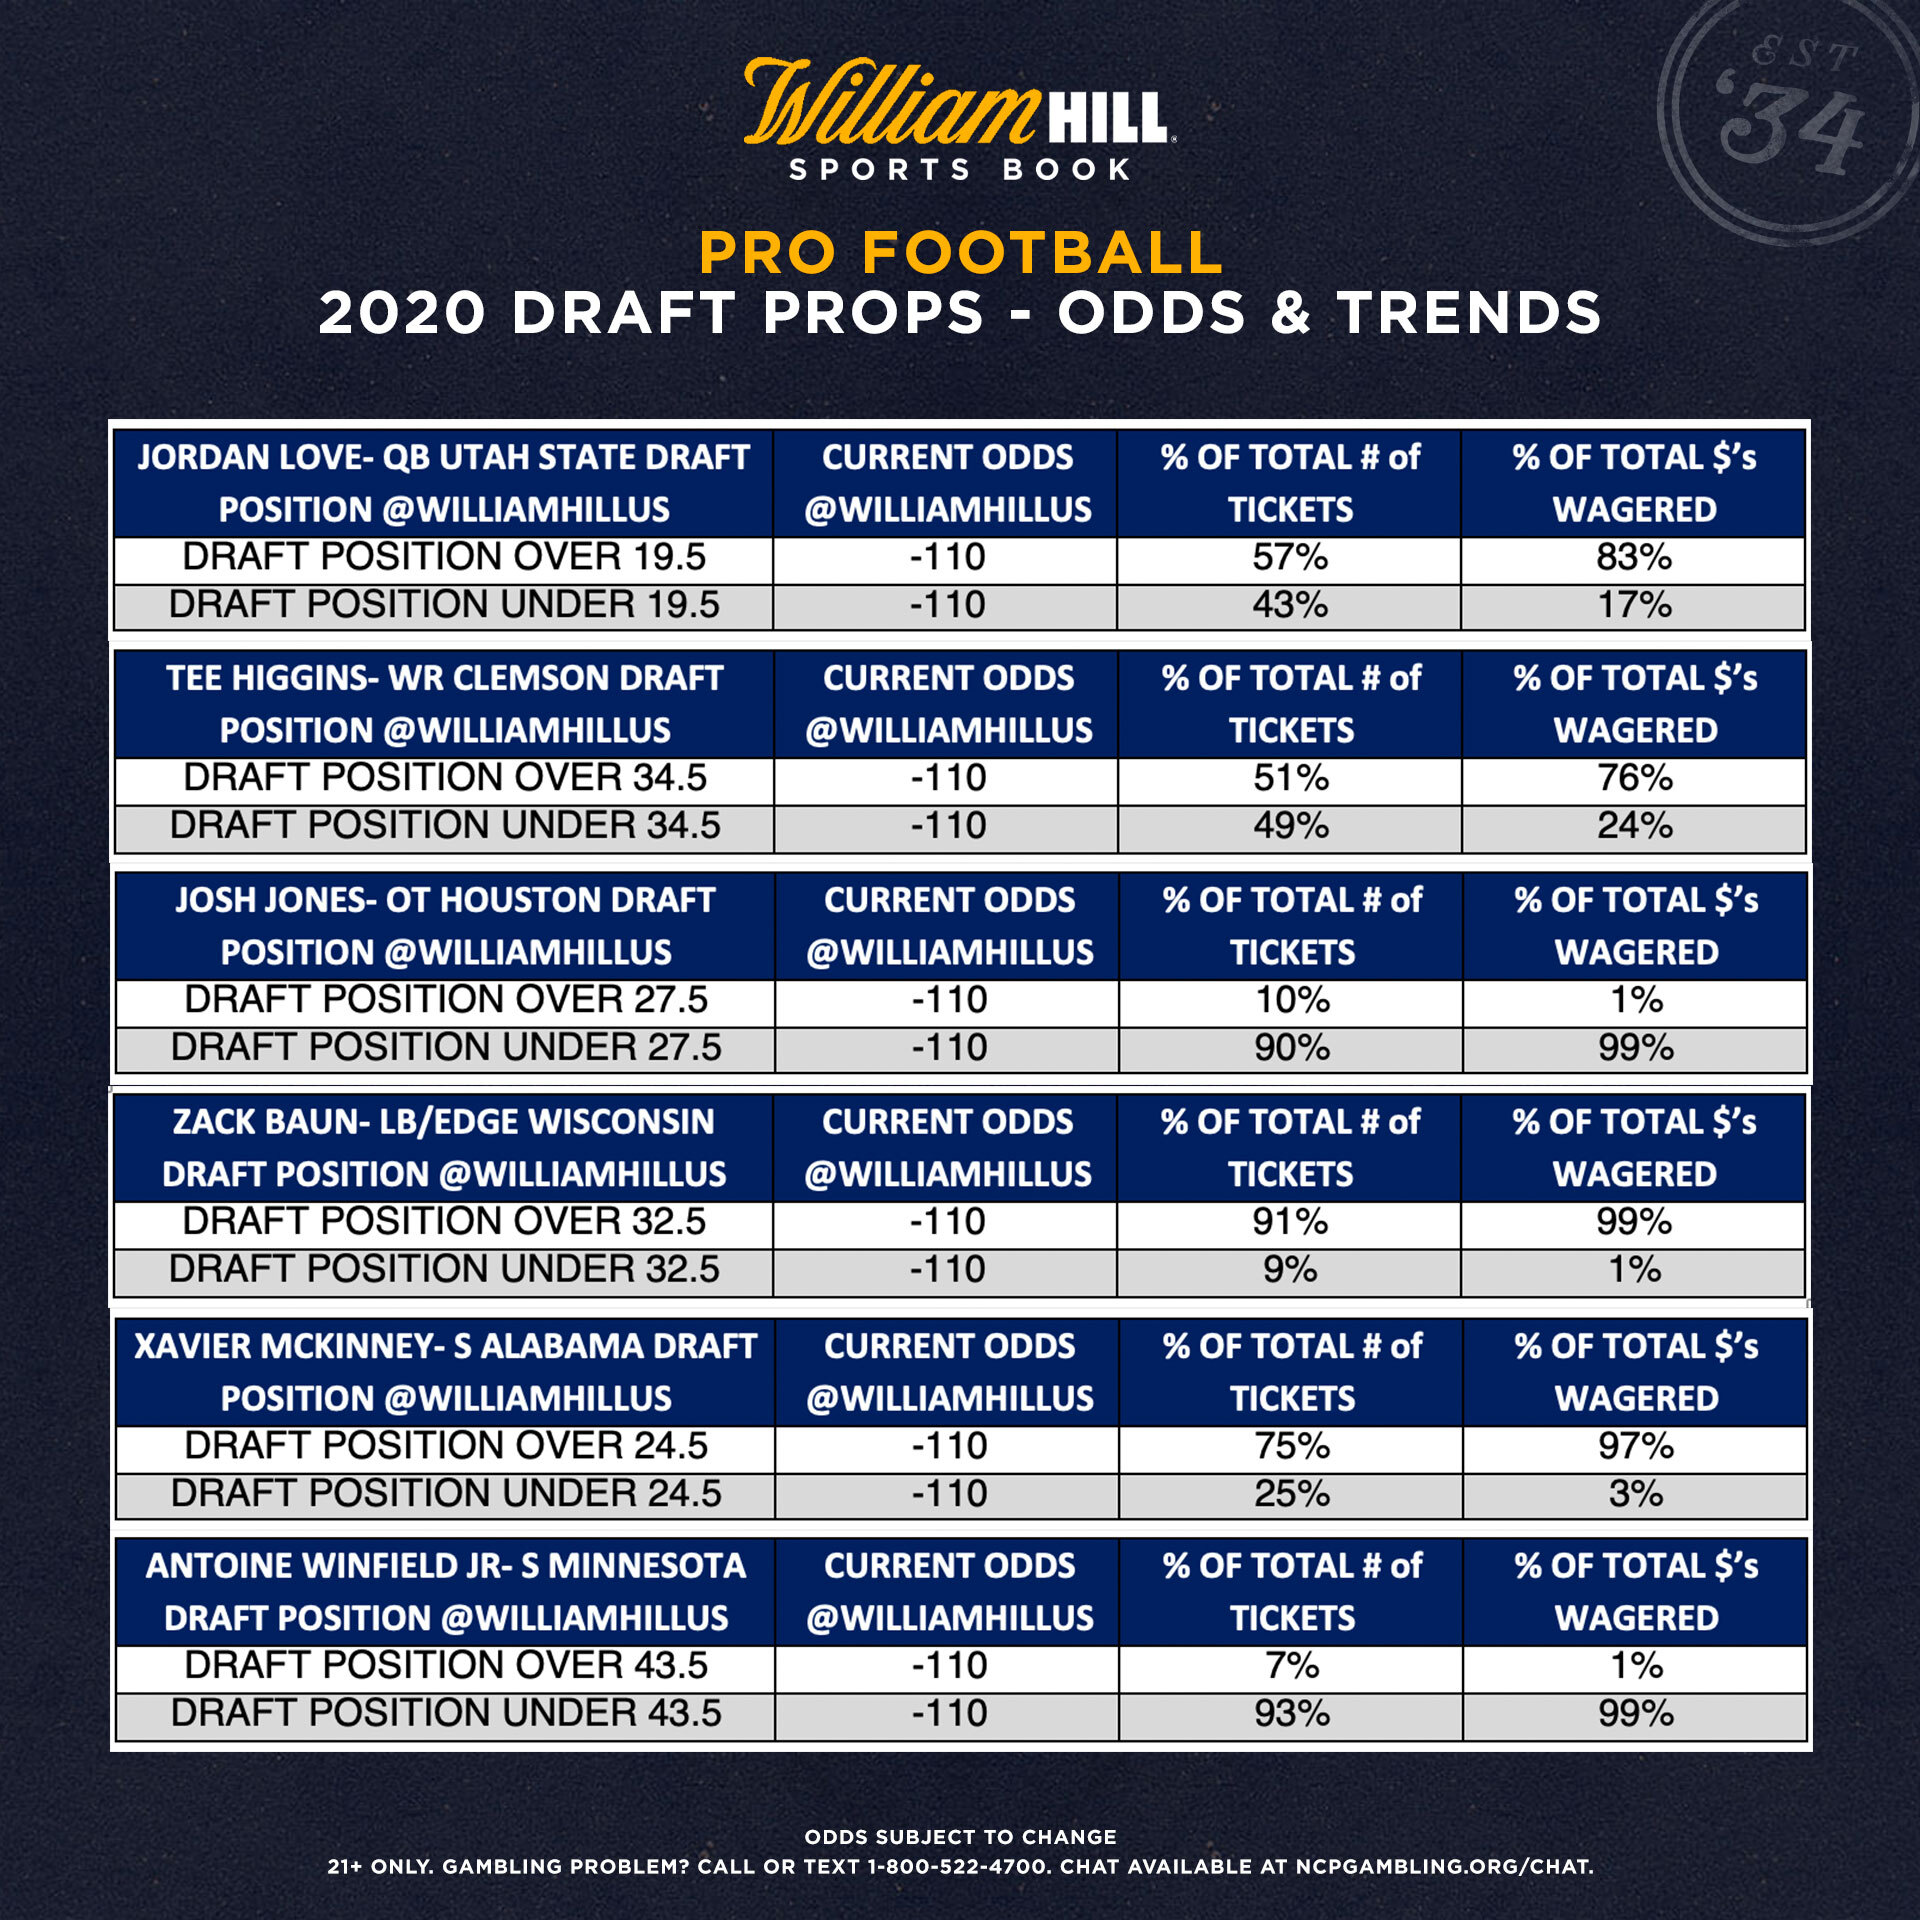 Pro Football 2020 Draft Which Players Have Seen Their Draft Position